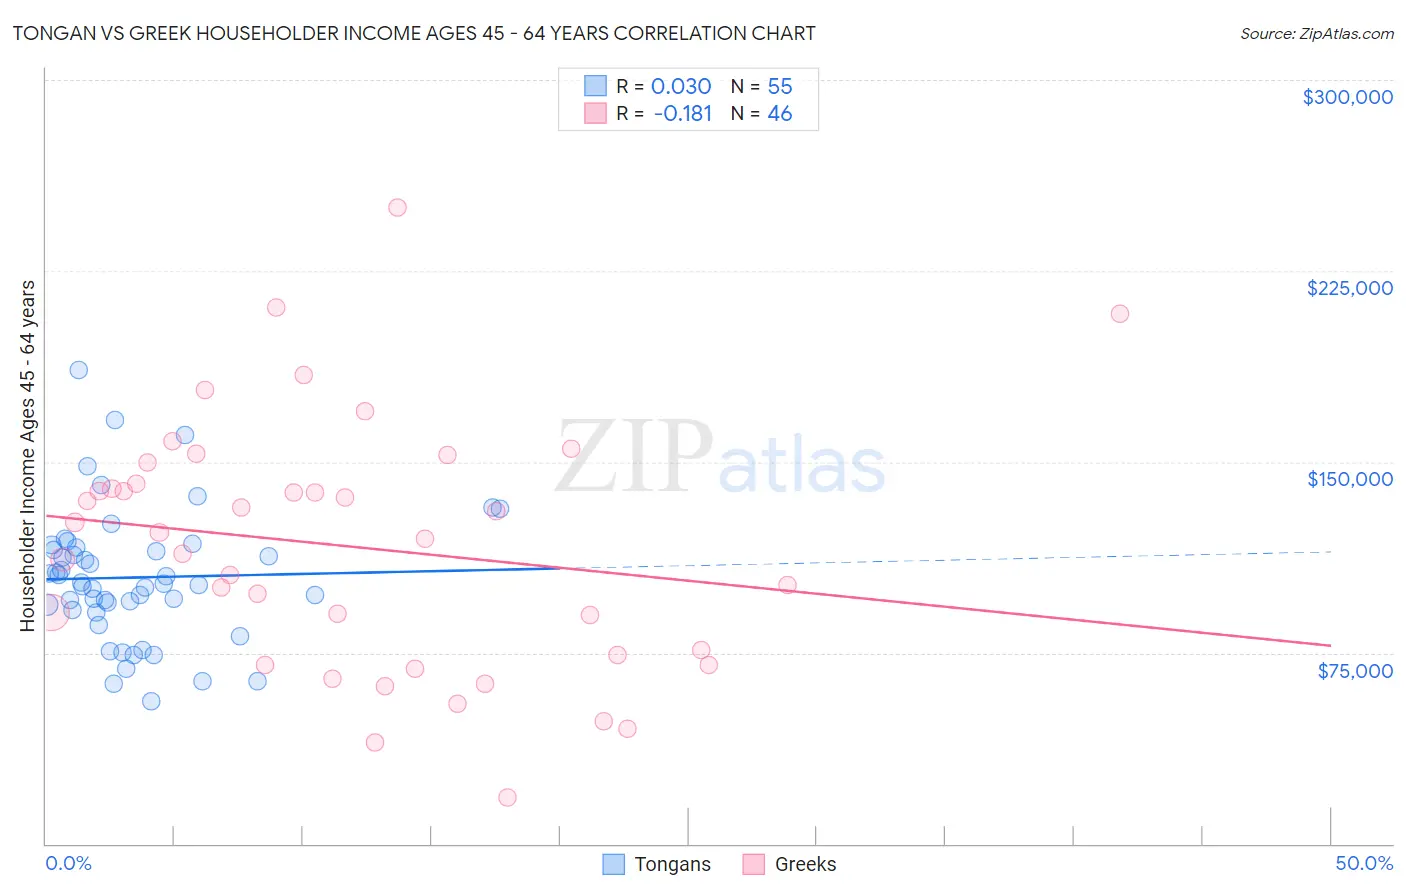 Tongan vs Greek Householder Income Ages 45 - 64 years